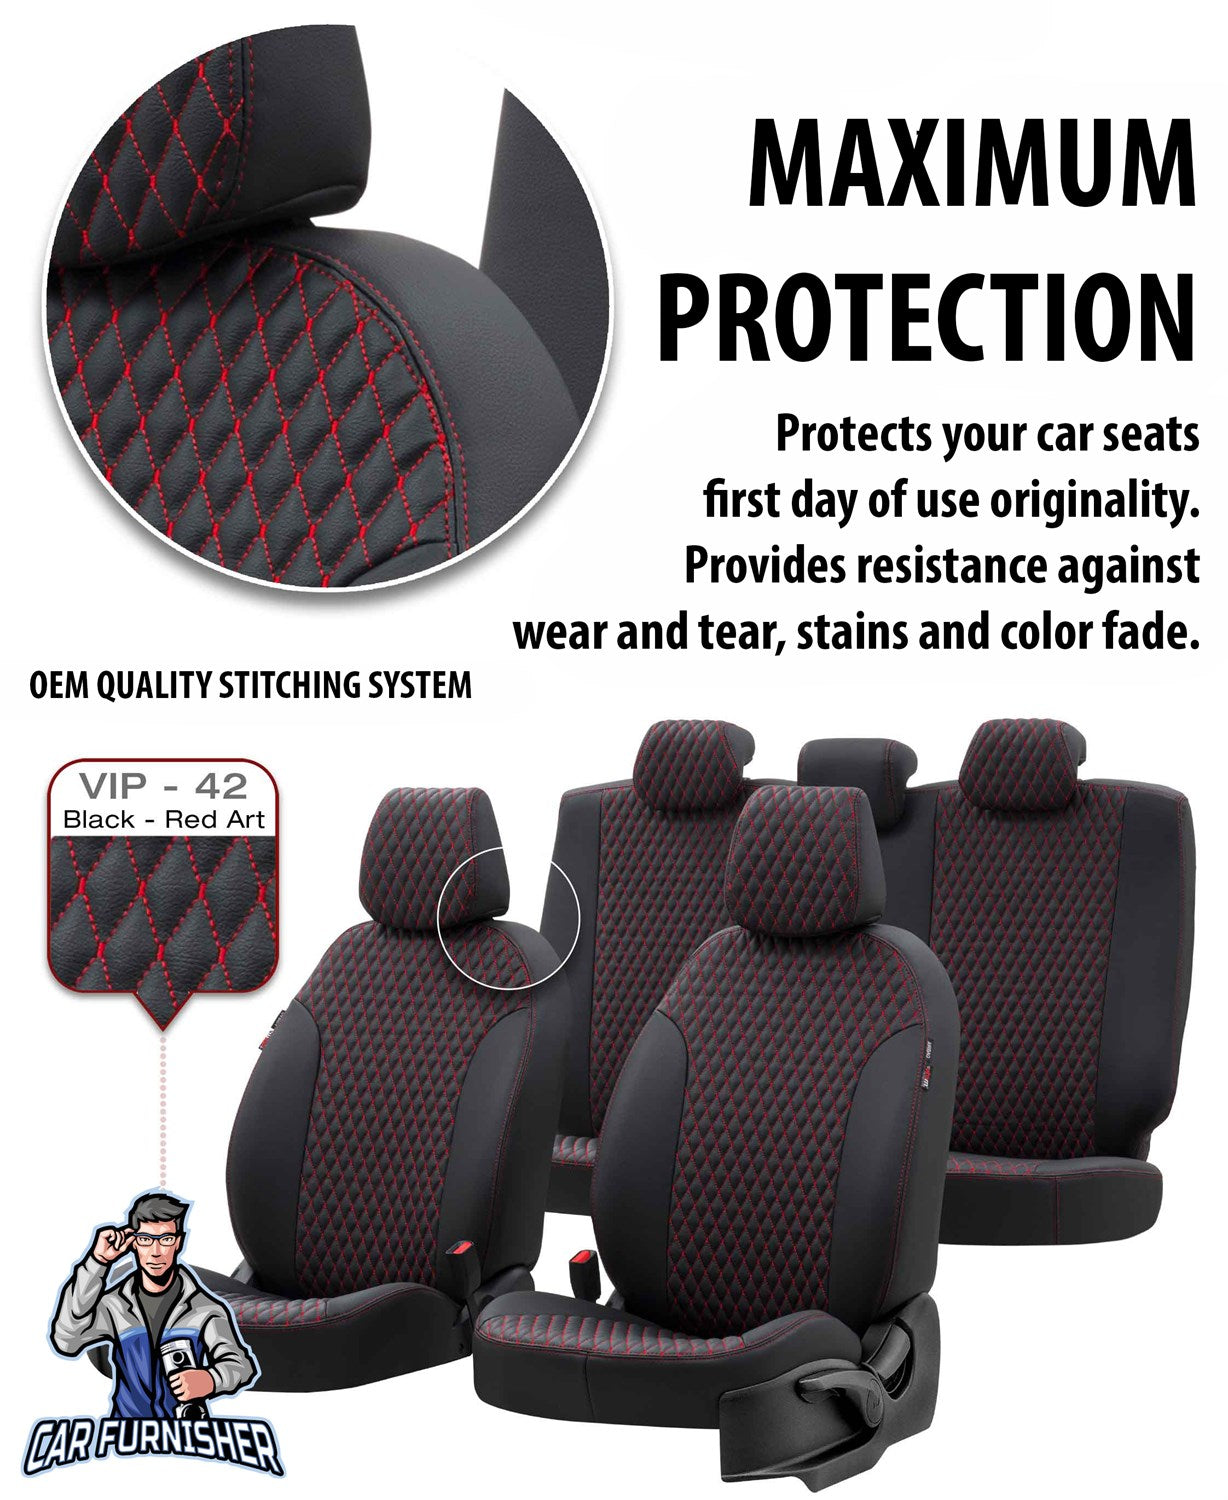 Man TGS Seat Cover Amsterdam Leather Design Ivory Front Seats (2 Seats + Handrest + Headrests) Leather